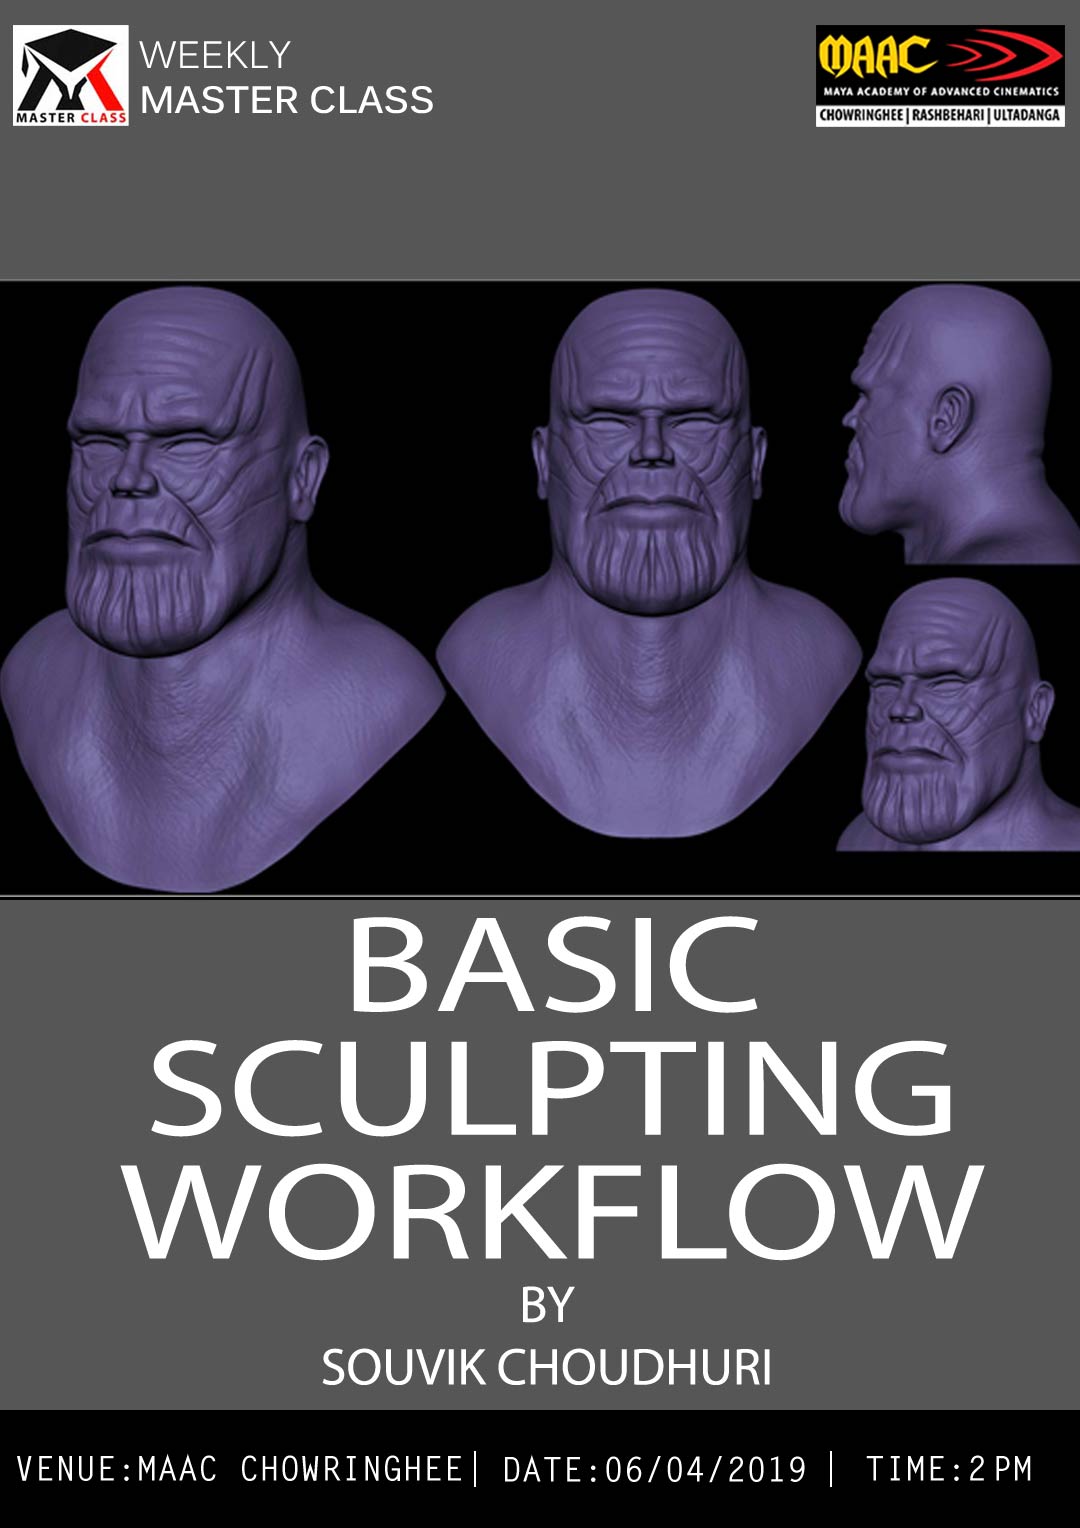 Weekly Master Class on Basic Sculpting Workflow